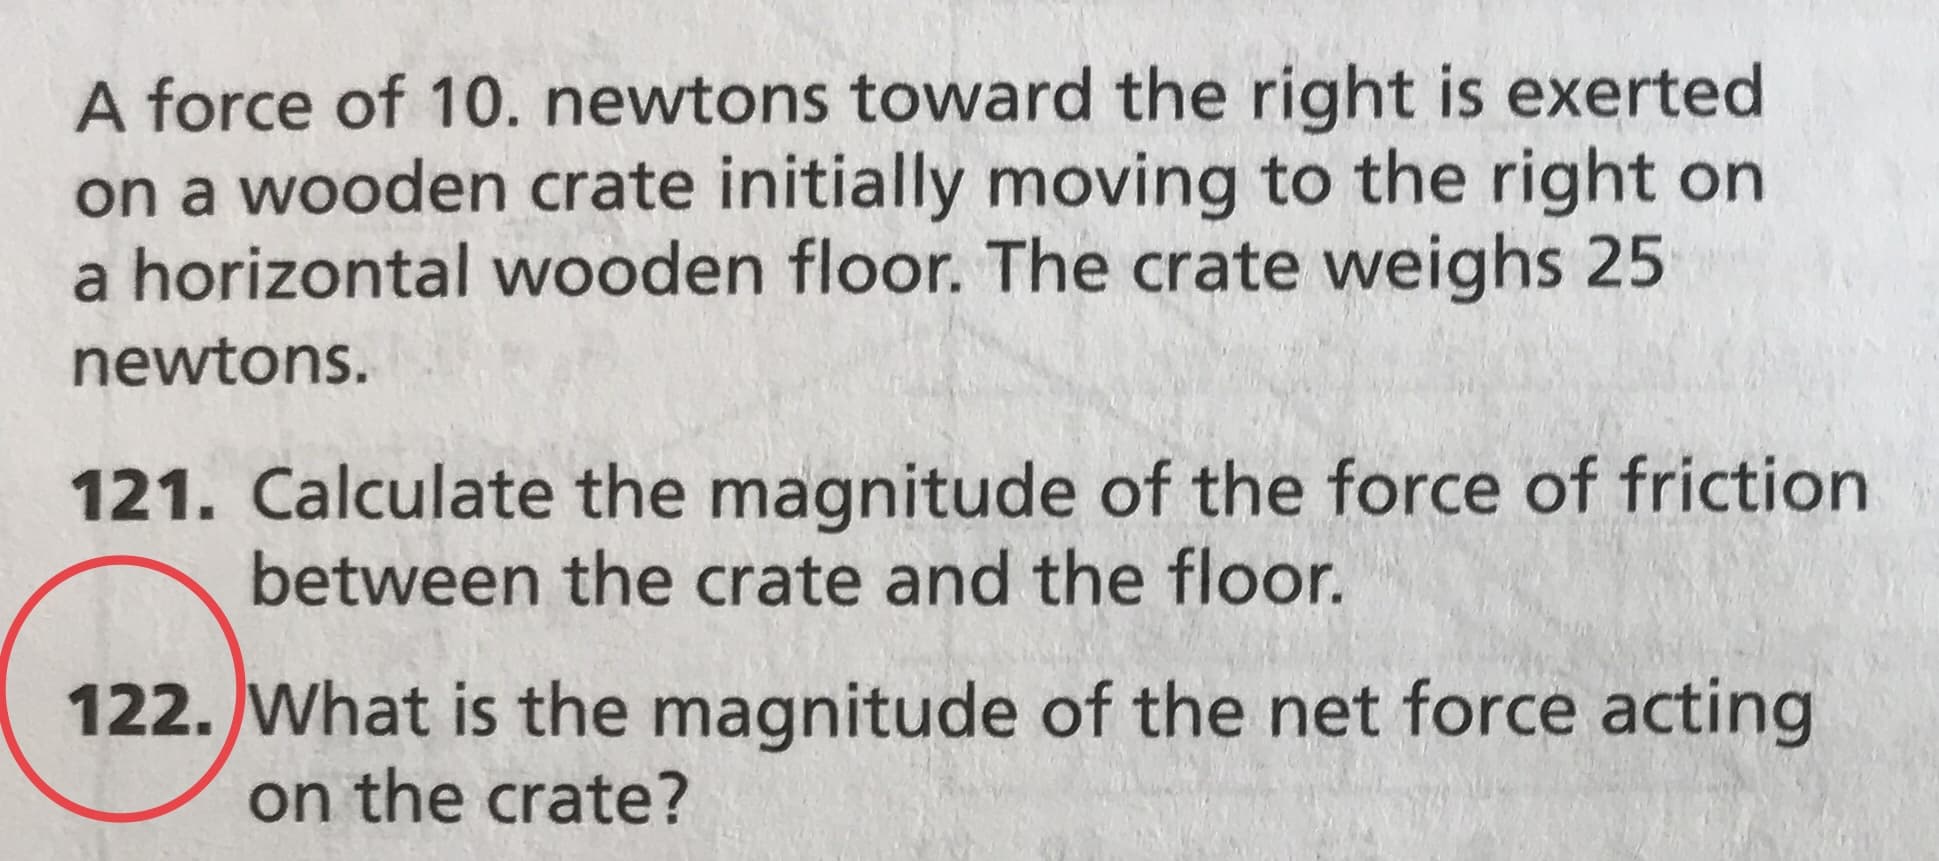 A force of 10. newtons toward the right is exerted
on a wooden crate initially moving to the right on
a horizontal wooden floor. The crate weighs 25
newtons.
121. Calculate the magnitude of the force of friction
between the crate and the floor.
122. What is the magnitude of the net force acting
on the crate?
